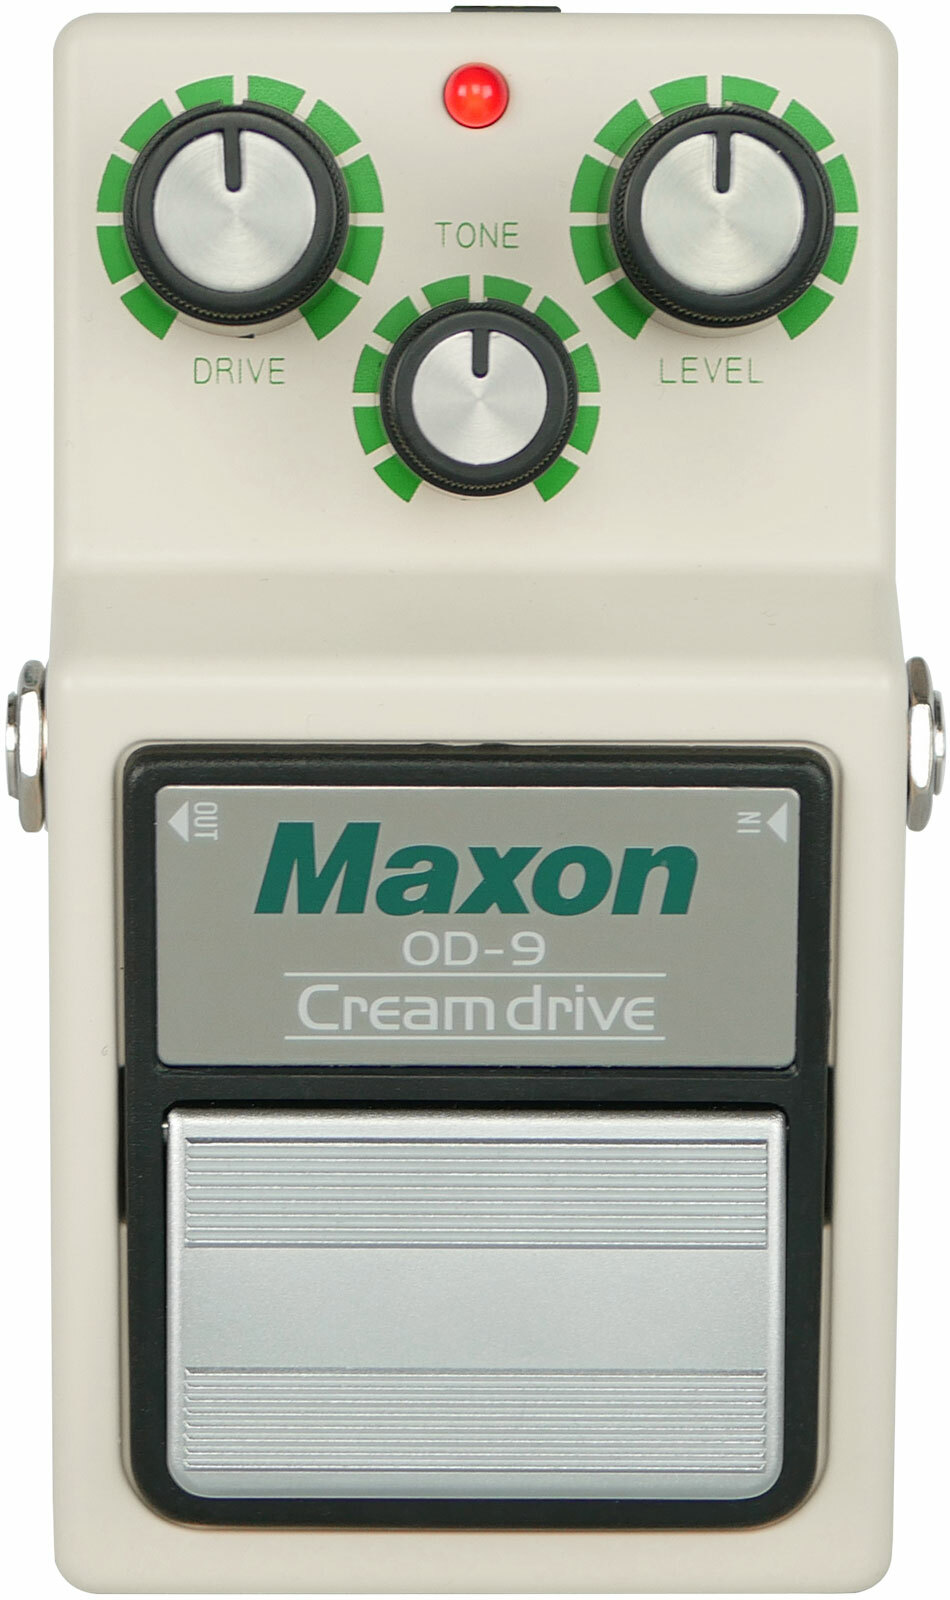 Maxon Od-9 Creamdrive Overdrive Jap Ltd - Overdrive, distortion & fuzz effect pedal - Main picture